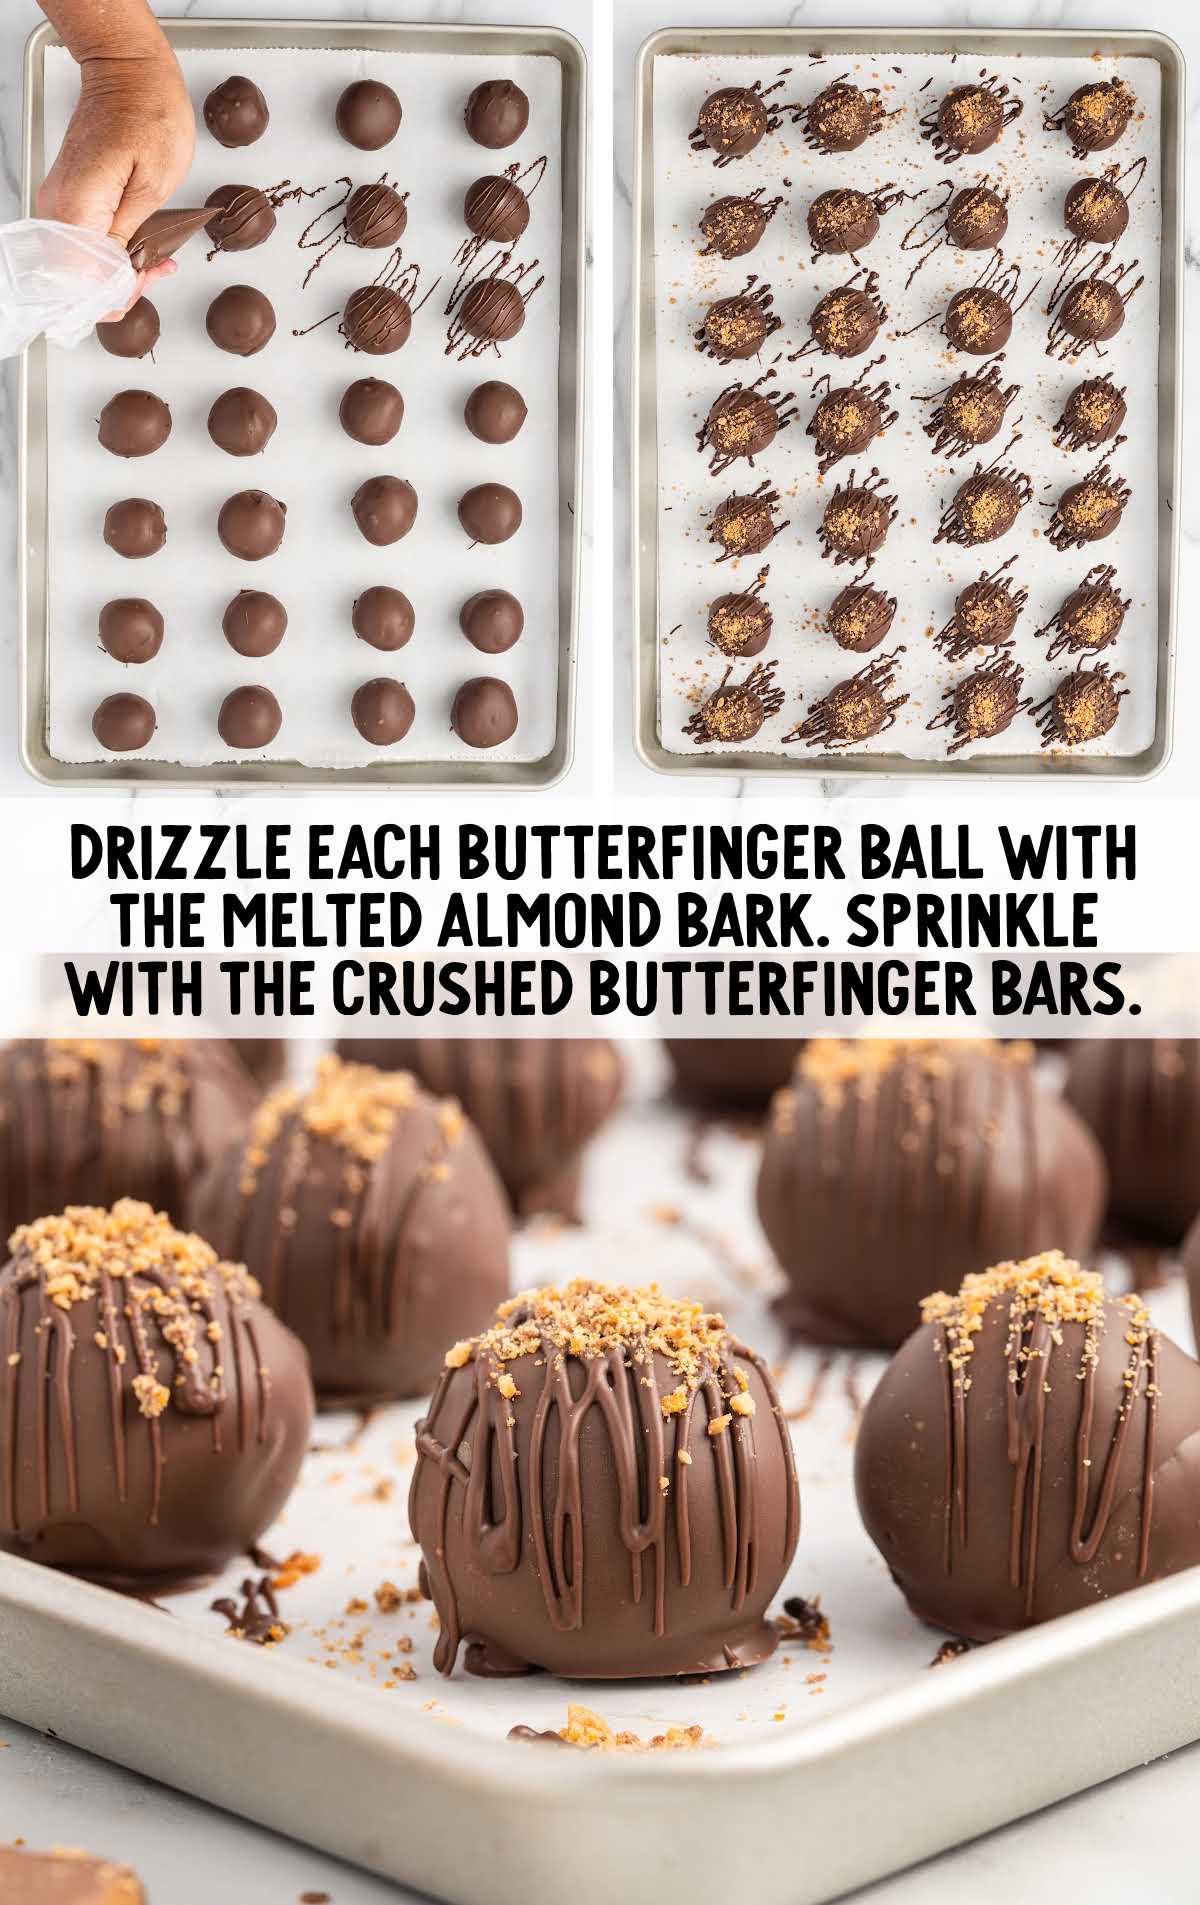 melted almond bark drizzled on each of the butterfingers and sprinkled with crushed butterfinger bars